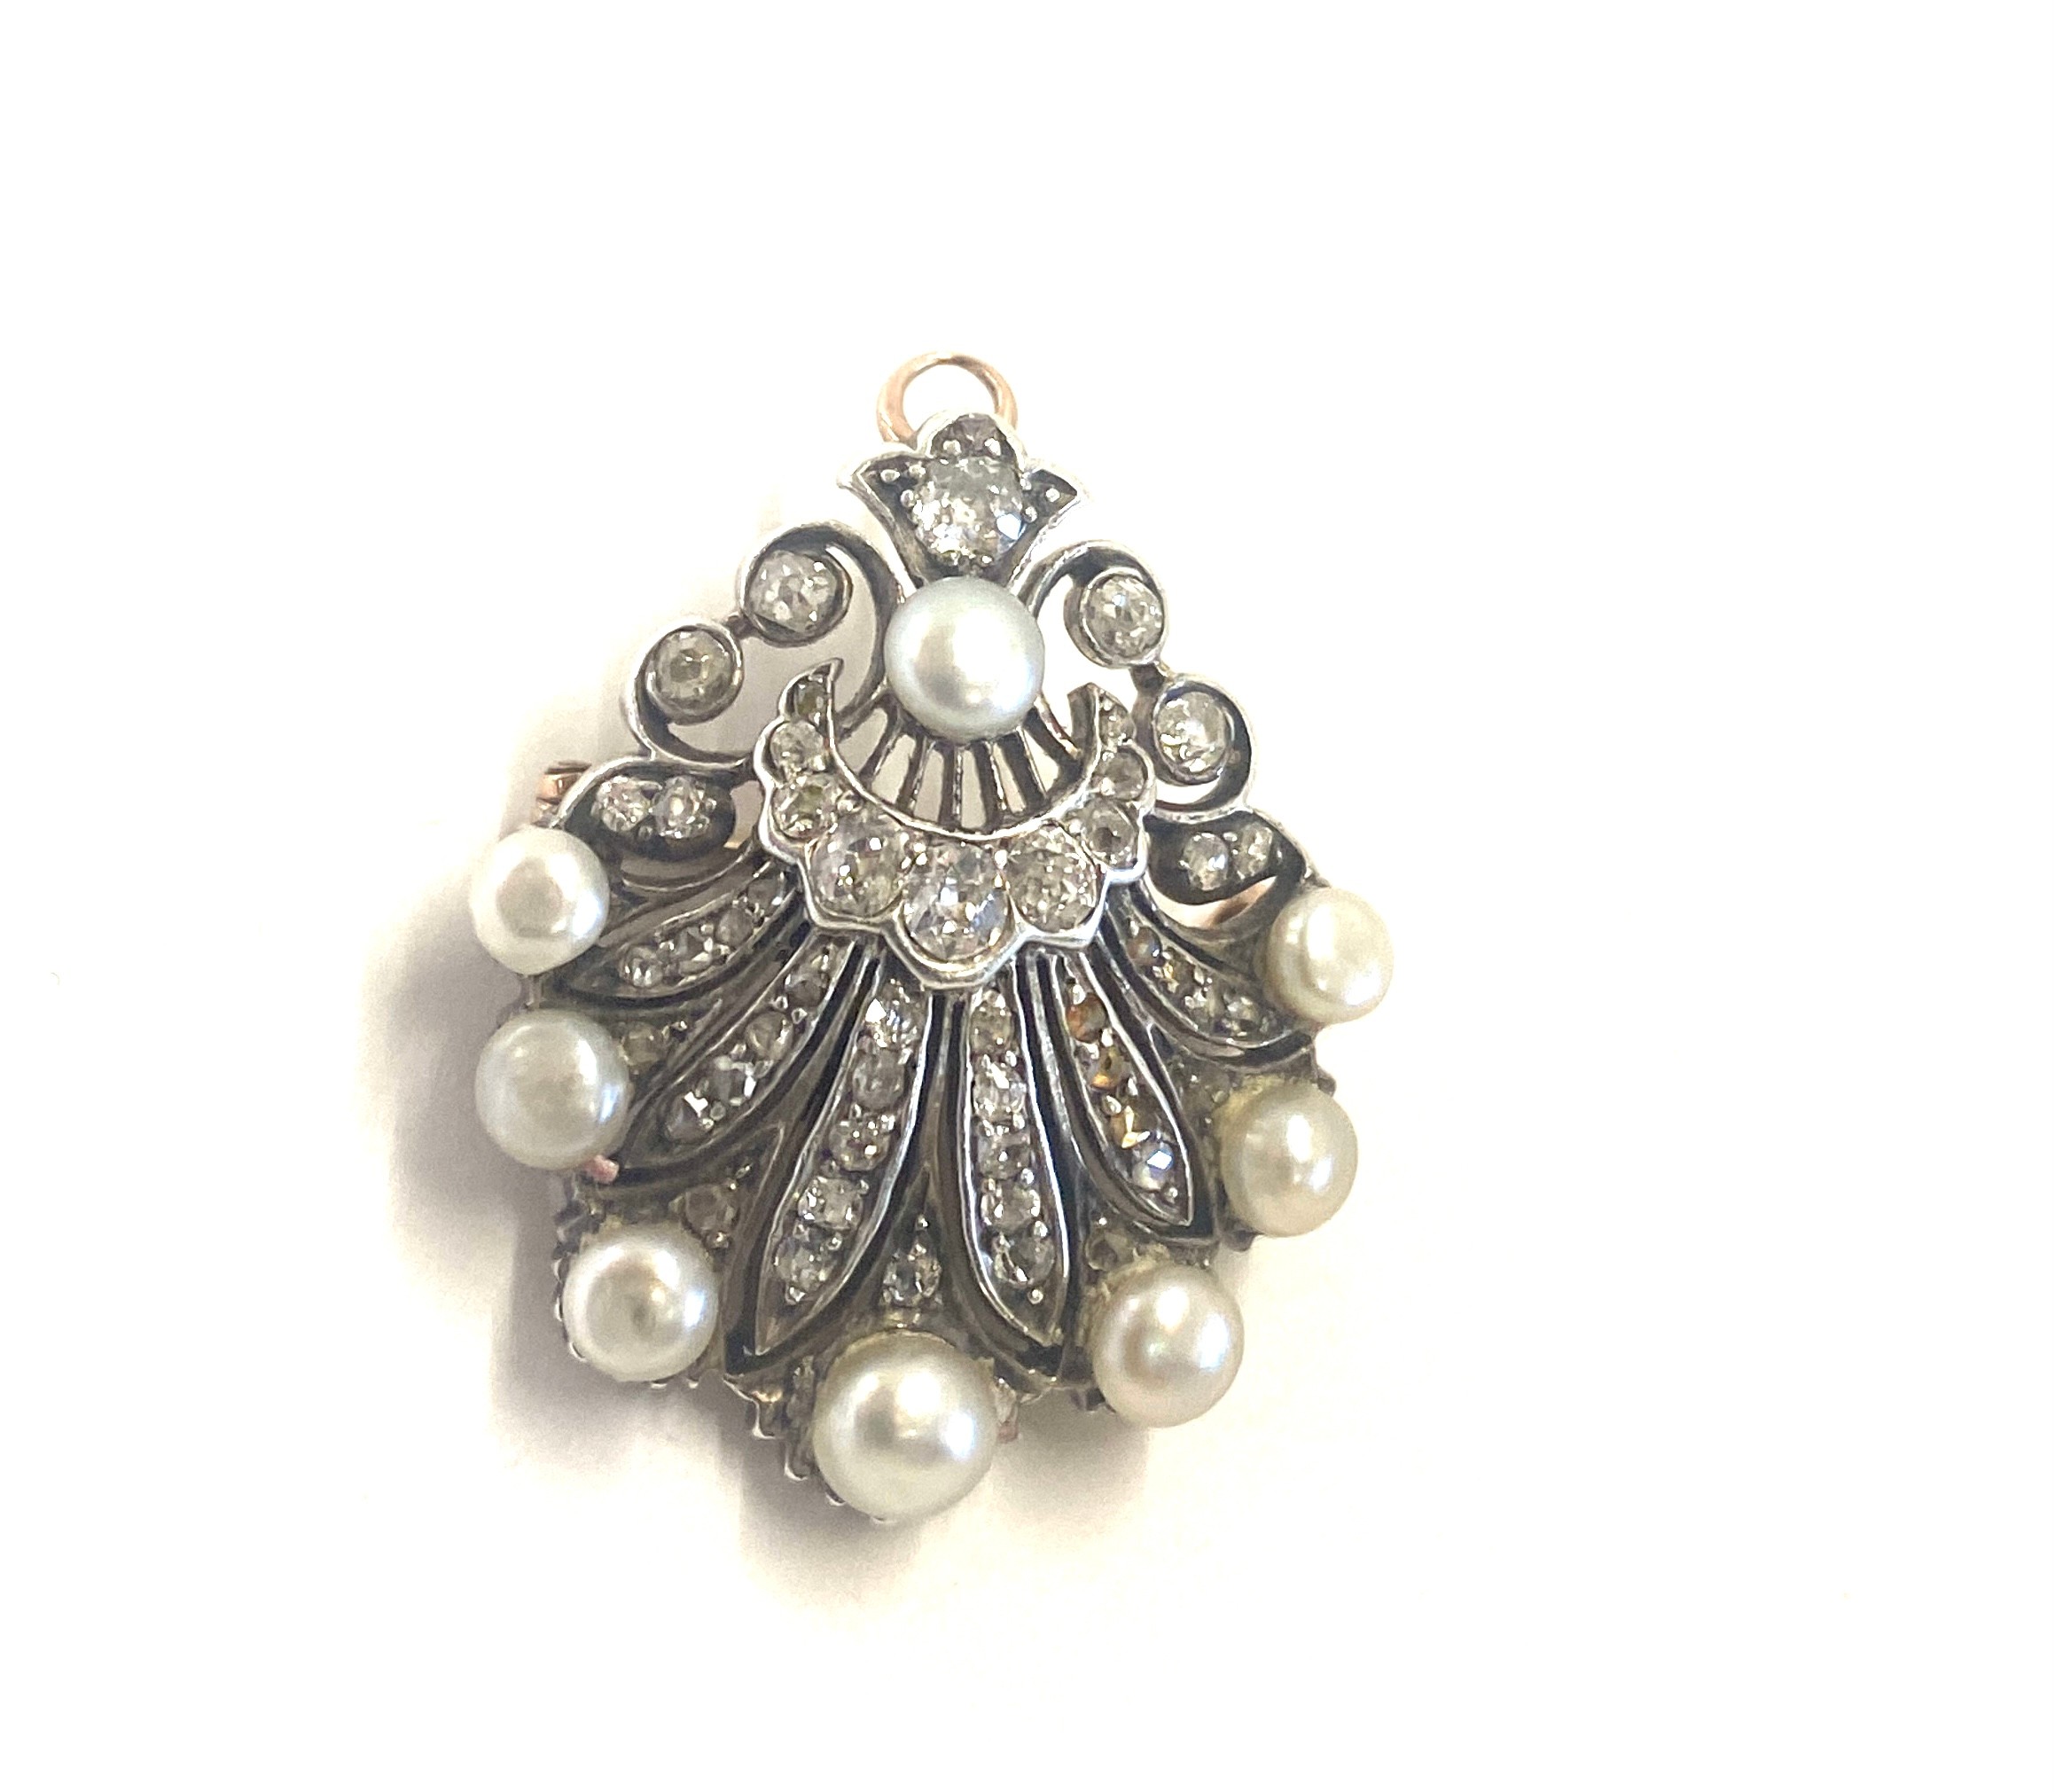 Antique natural pearl and diamond gold backed brooch/ pendant. Measures 4cm tall 3 cm wide. - Image 6 of 8